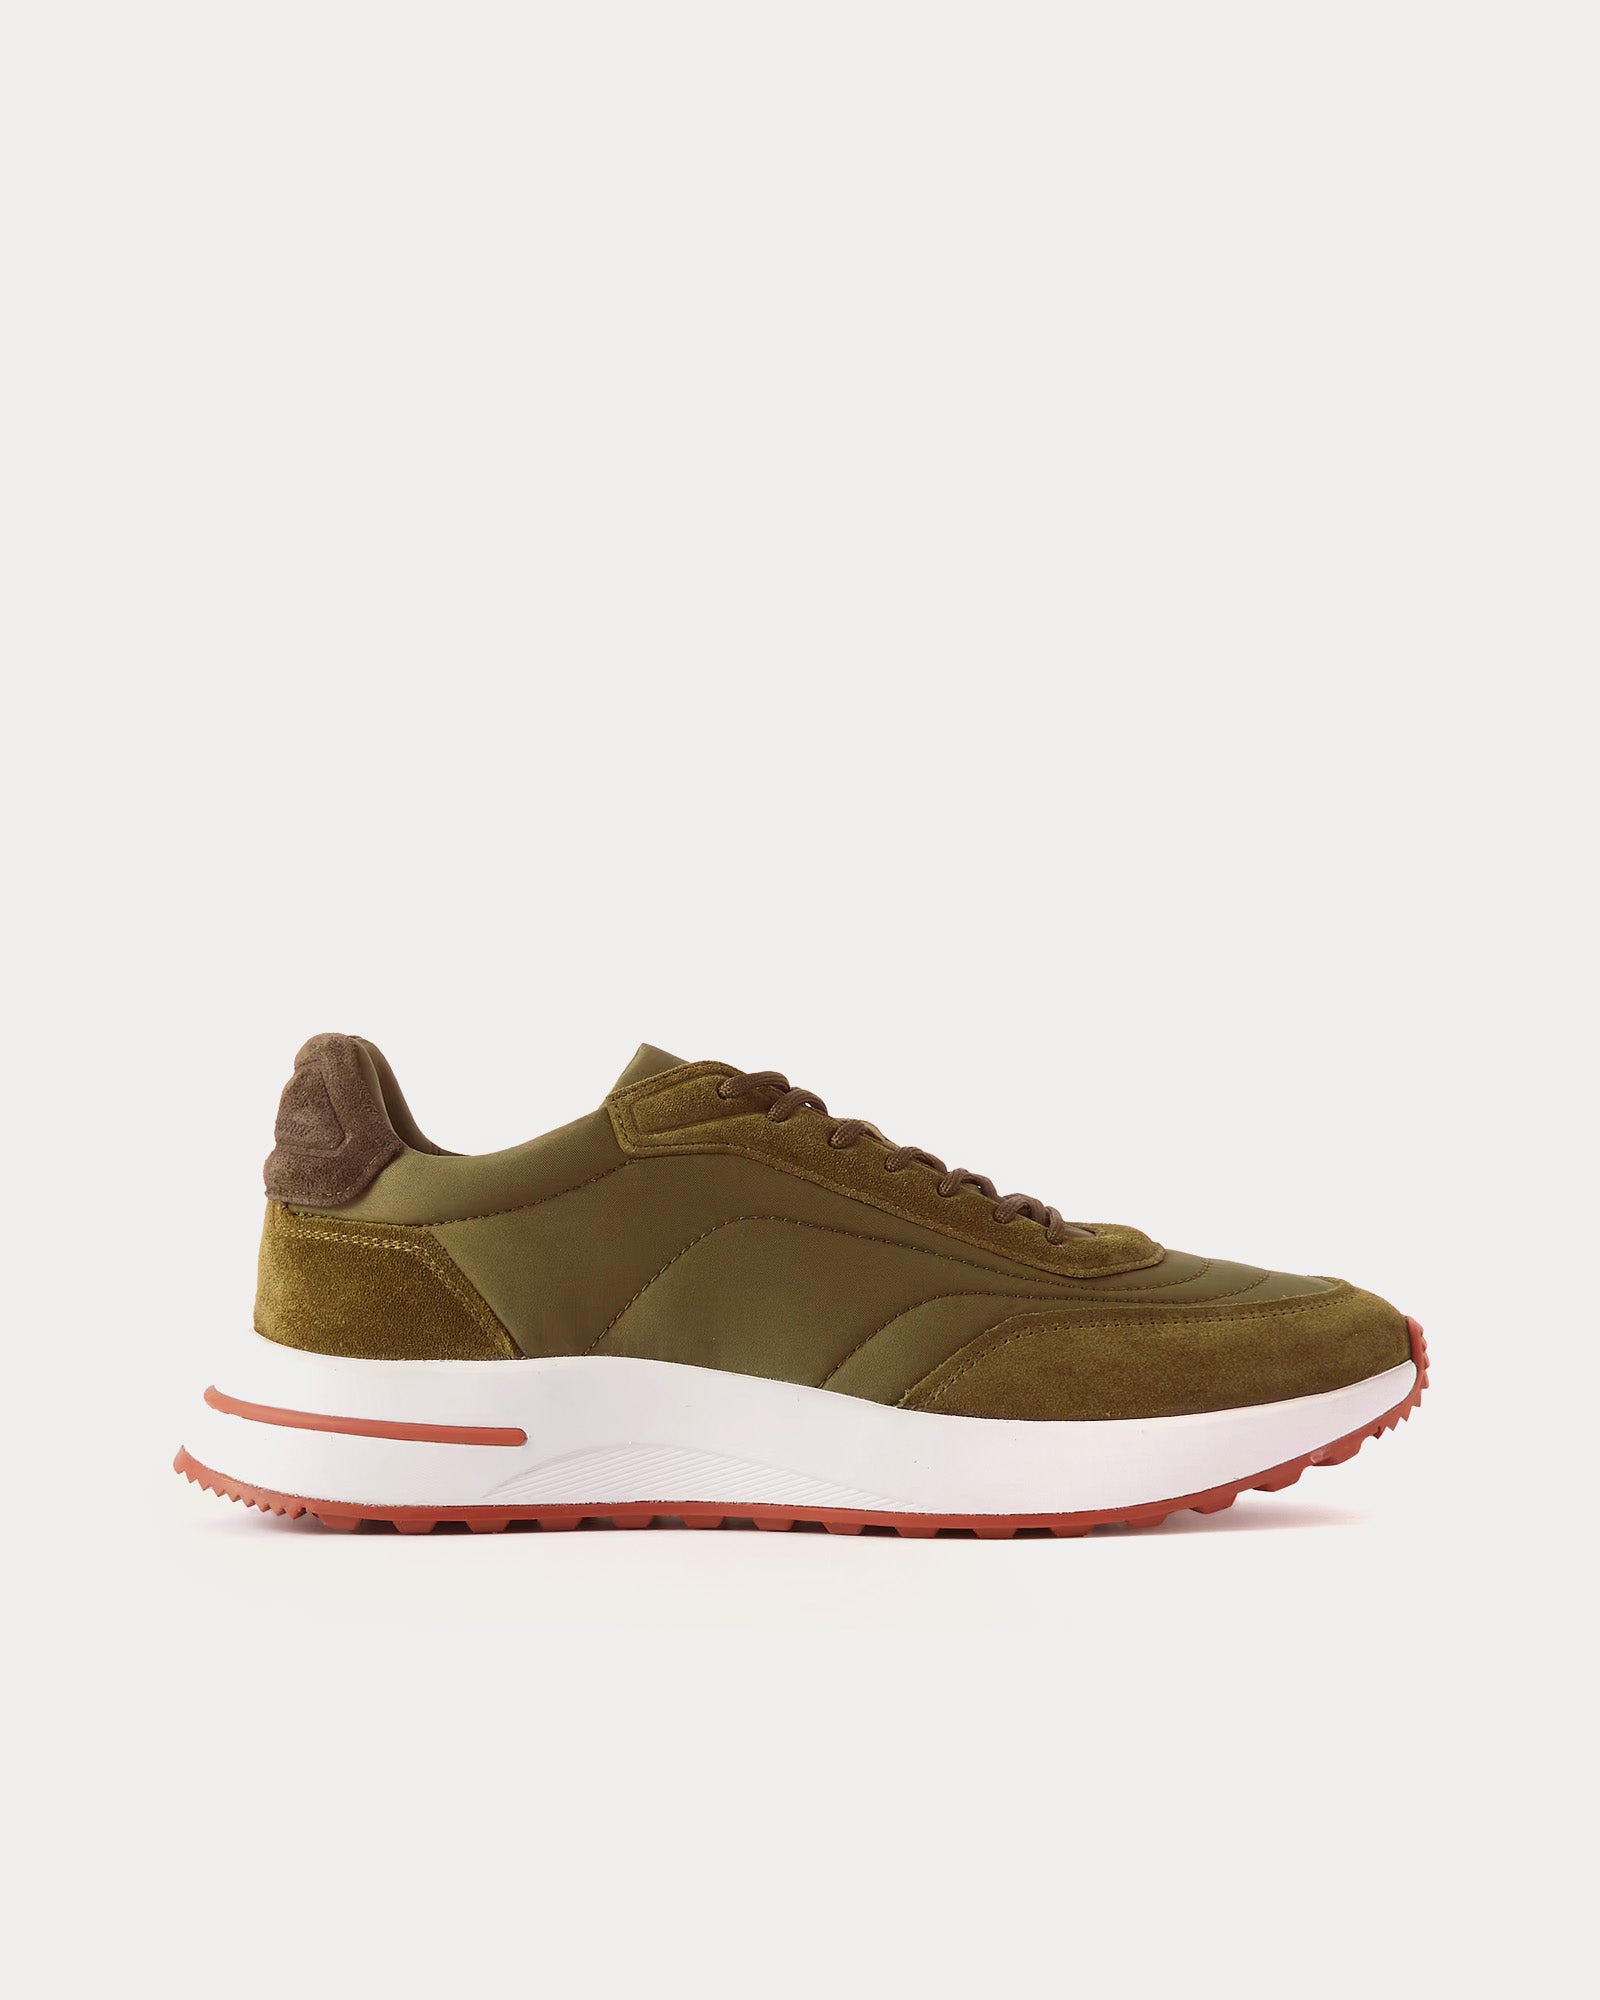 Loro Piana Olive Green Knit Fabric and Leather Low Top Sneakers